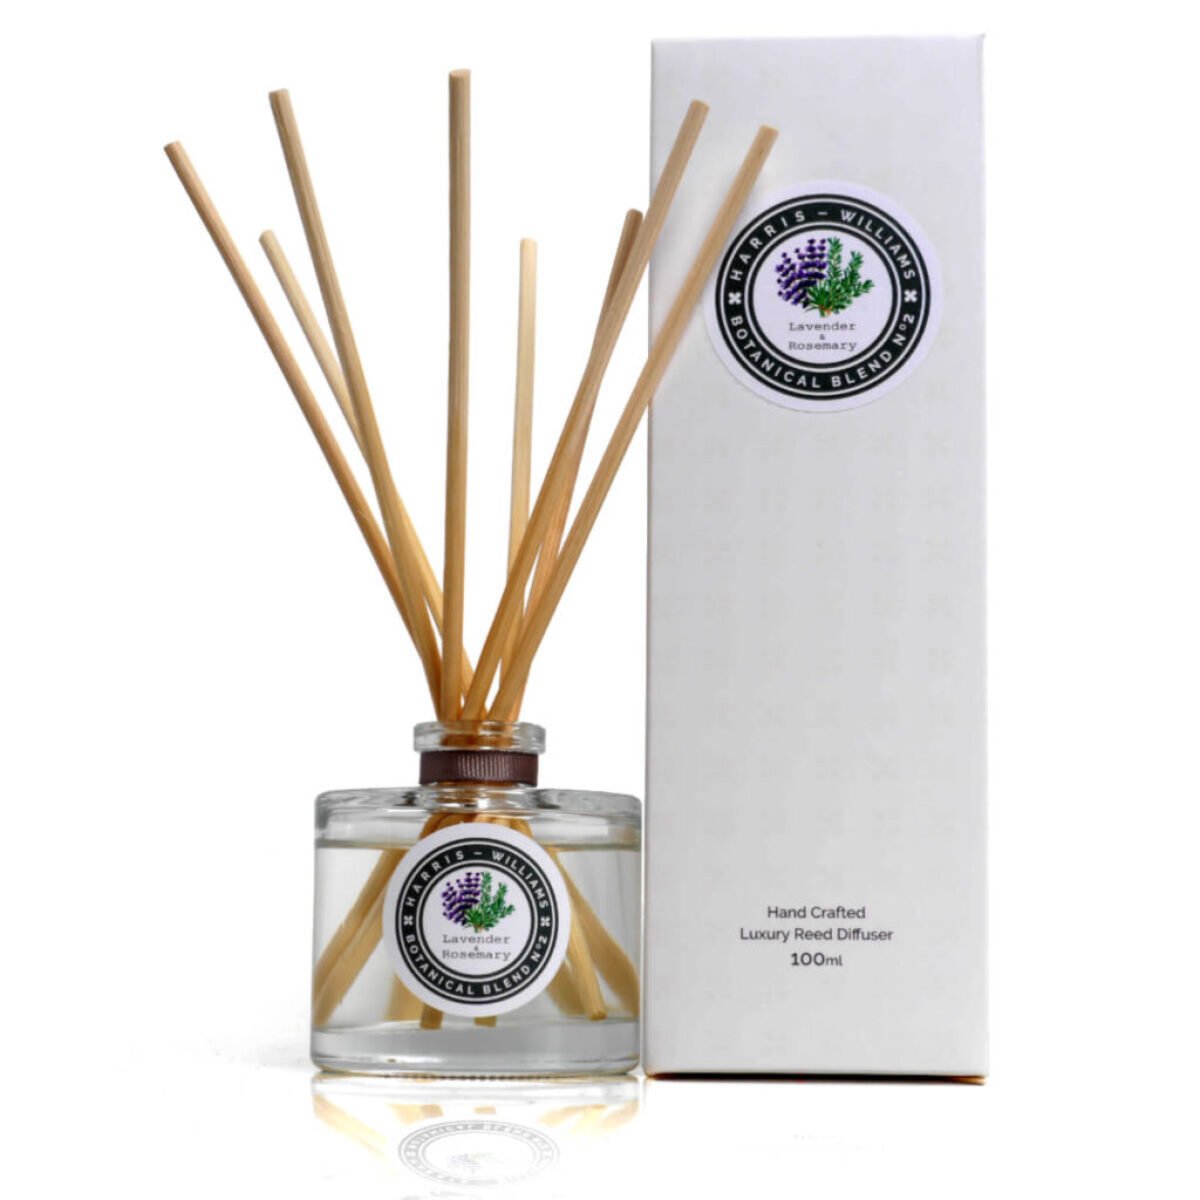 Botanical Blend No 2 Lavender & Rosemary Reed Diffuser